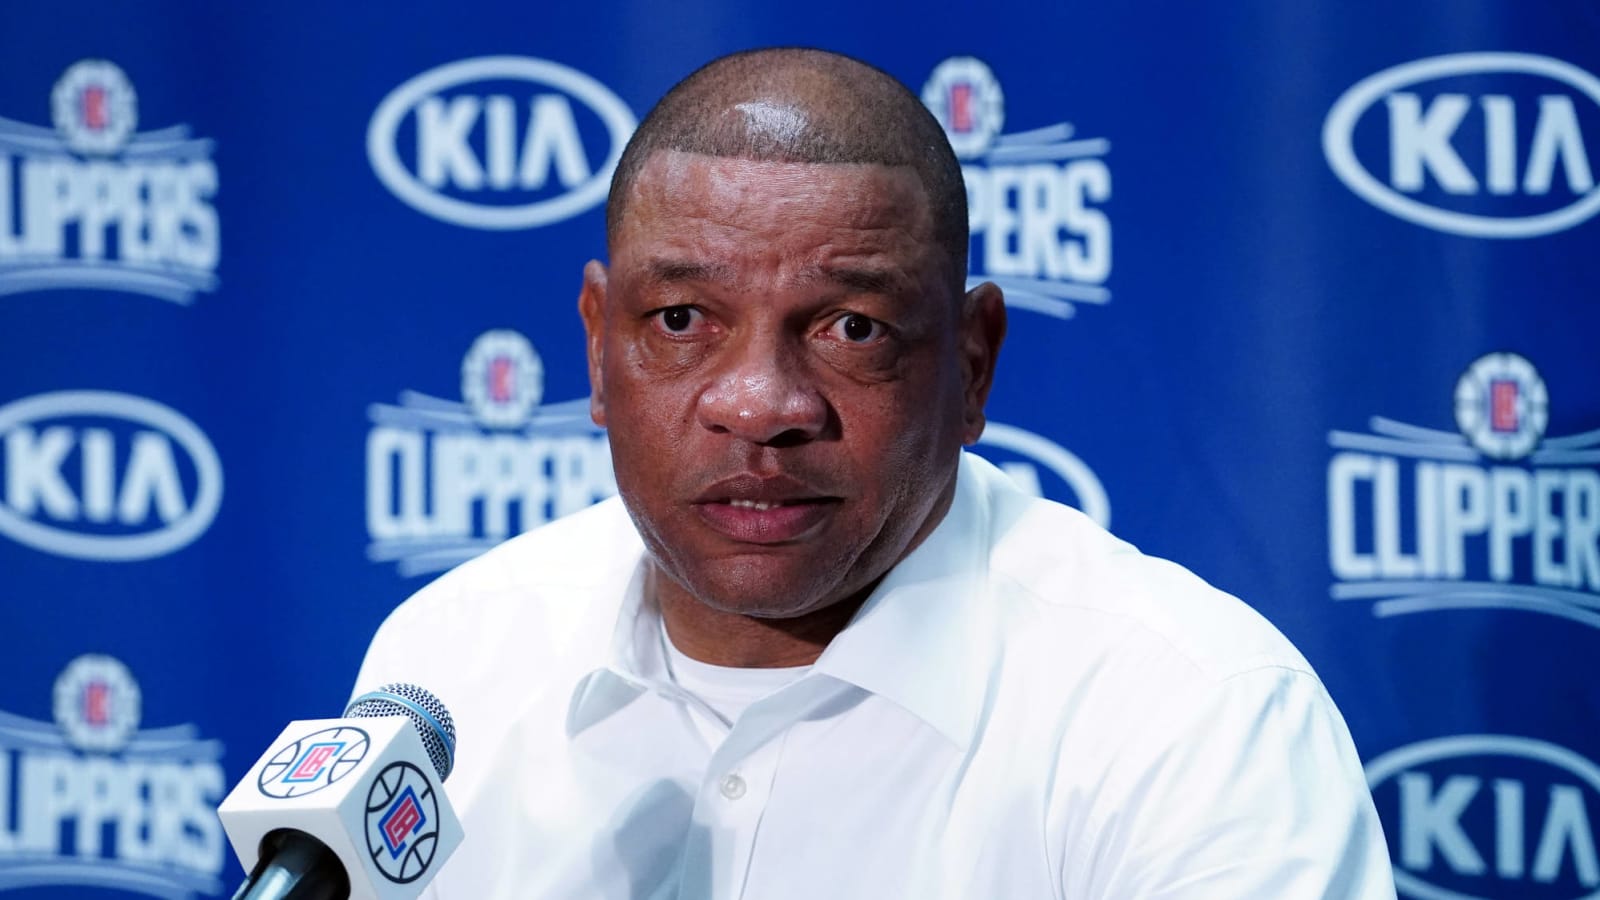 Doc Rivers urged Austin not to sign with Sixers